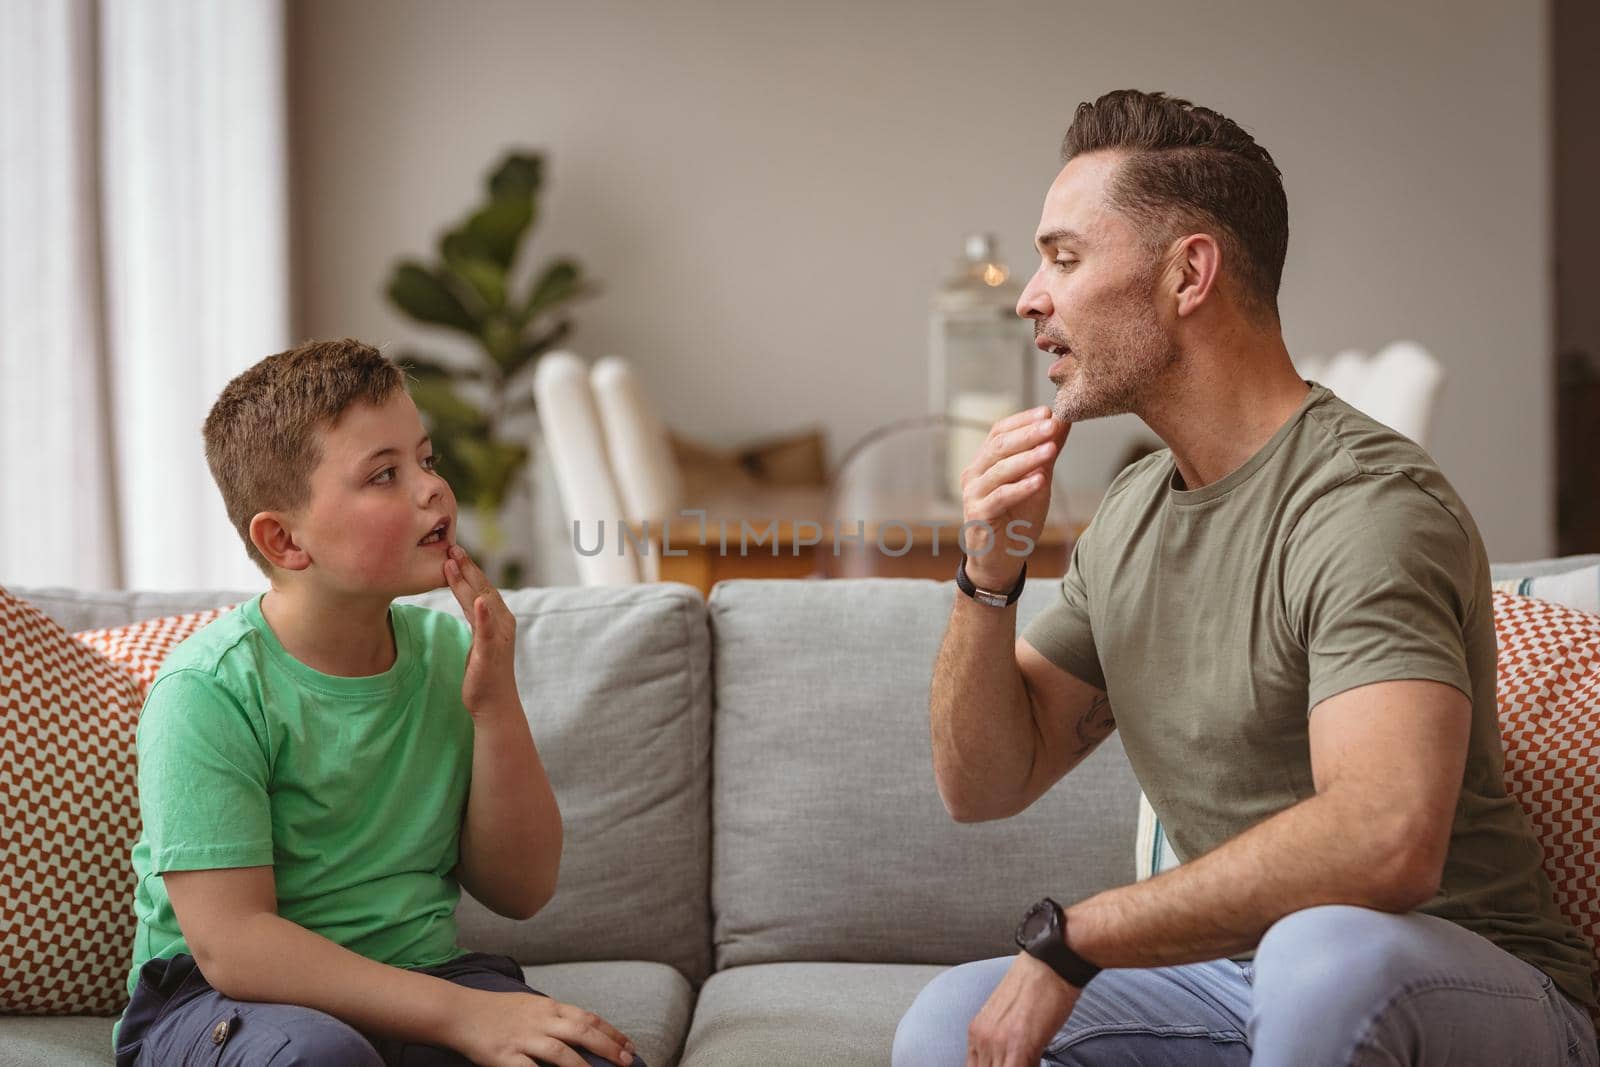 Caucasian father and son communicating using sign language while sitting on the couch at home. sign language learning concept